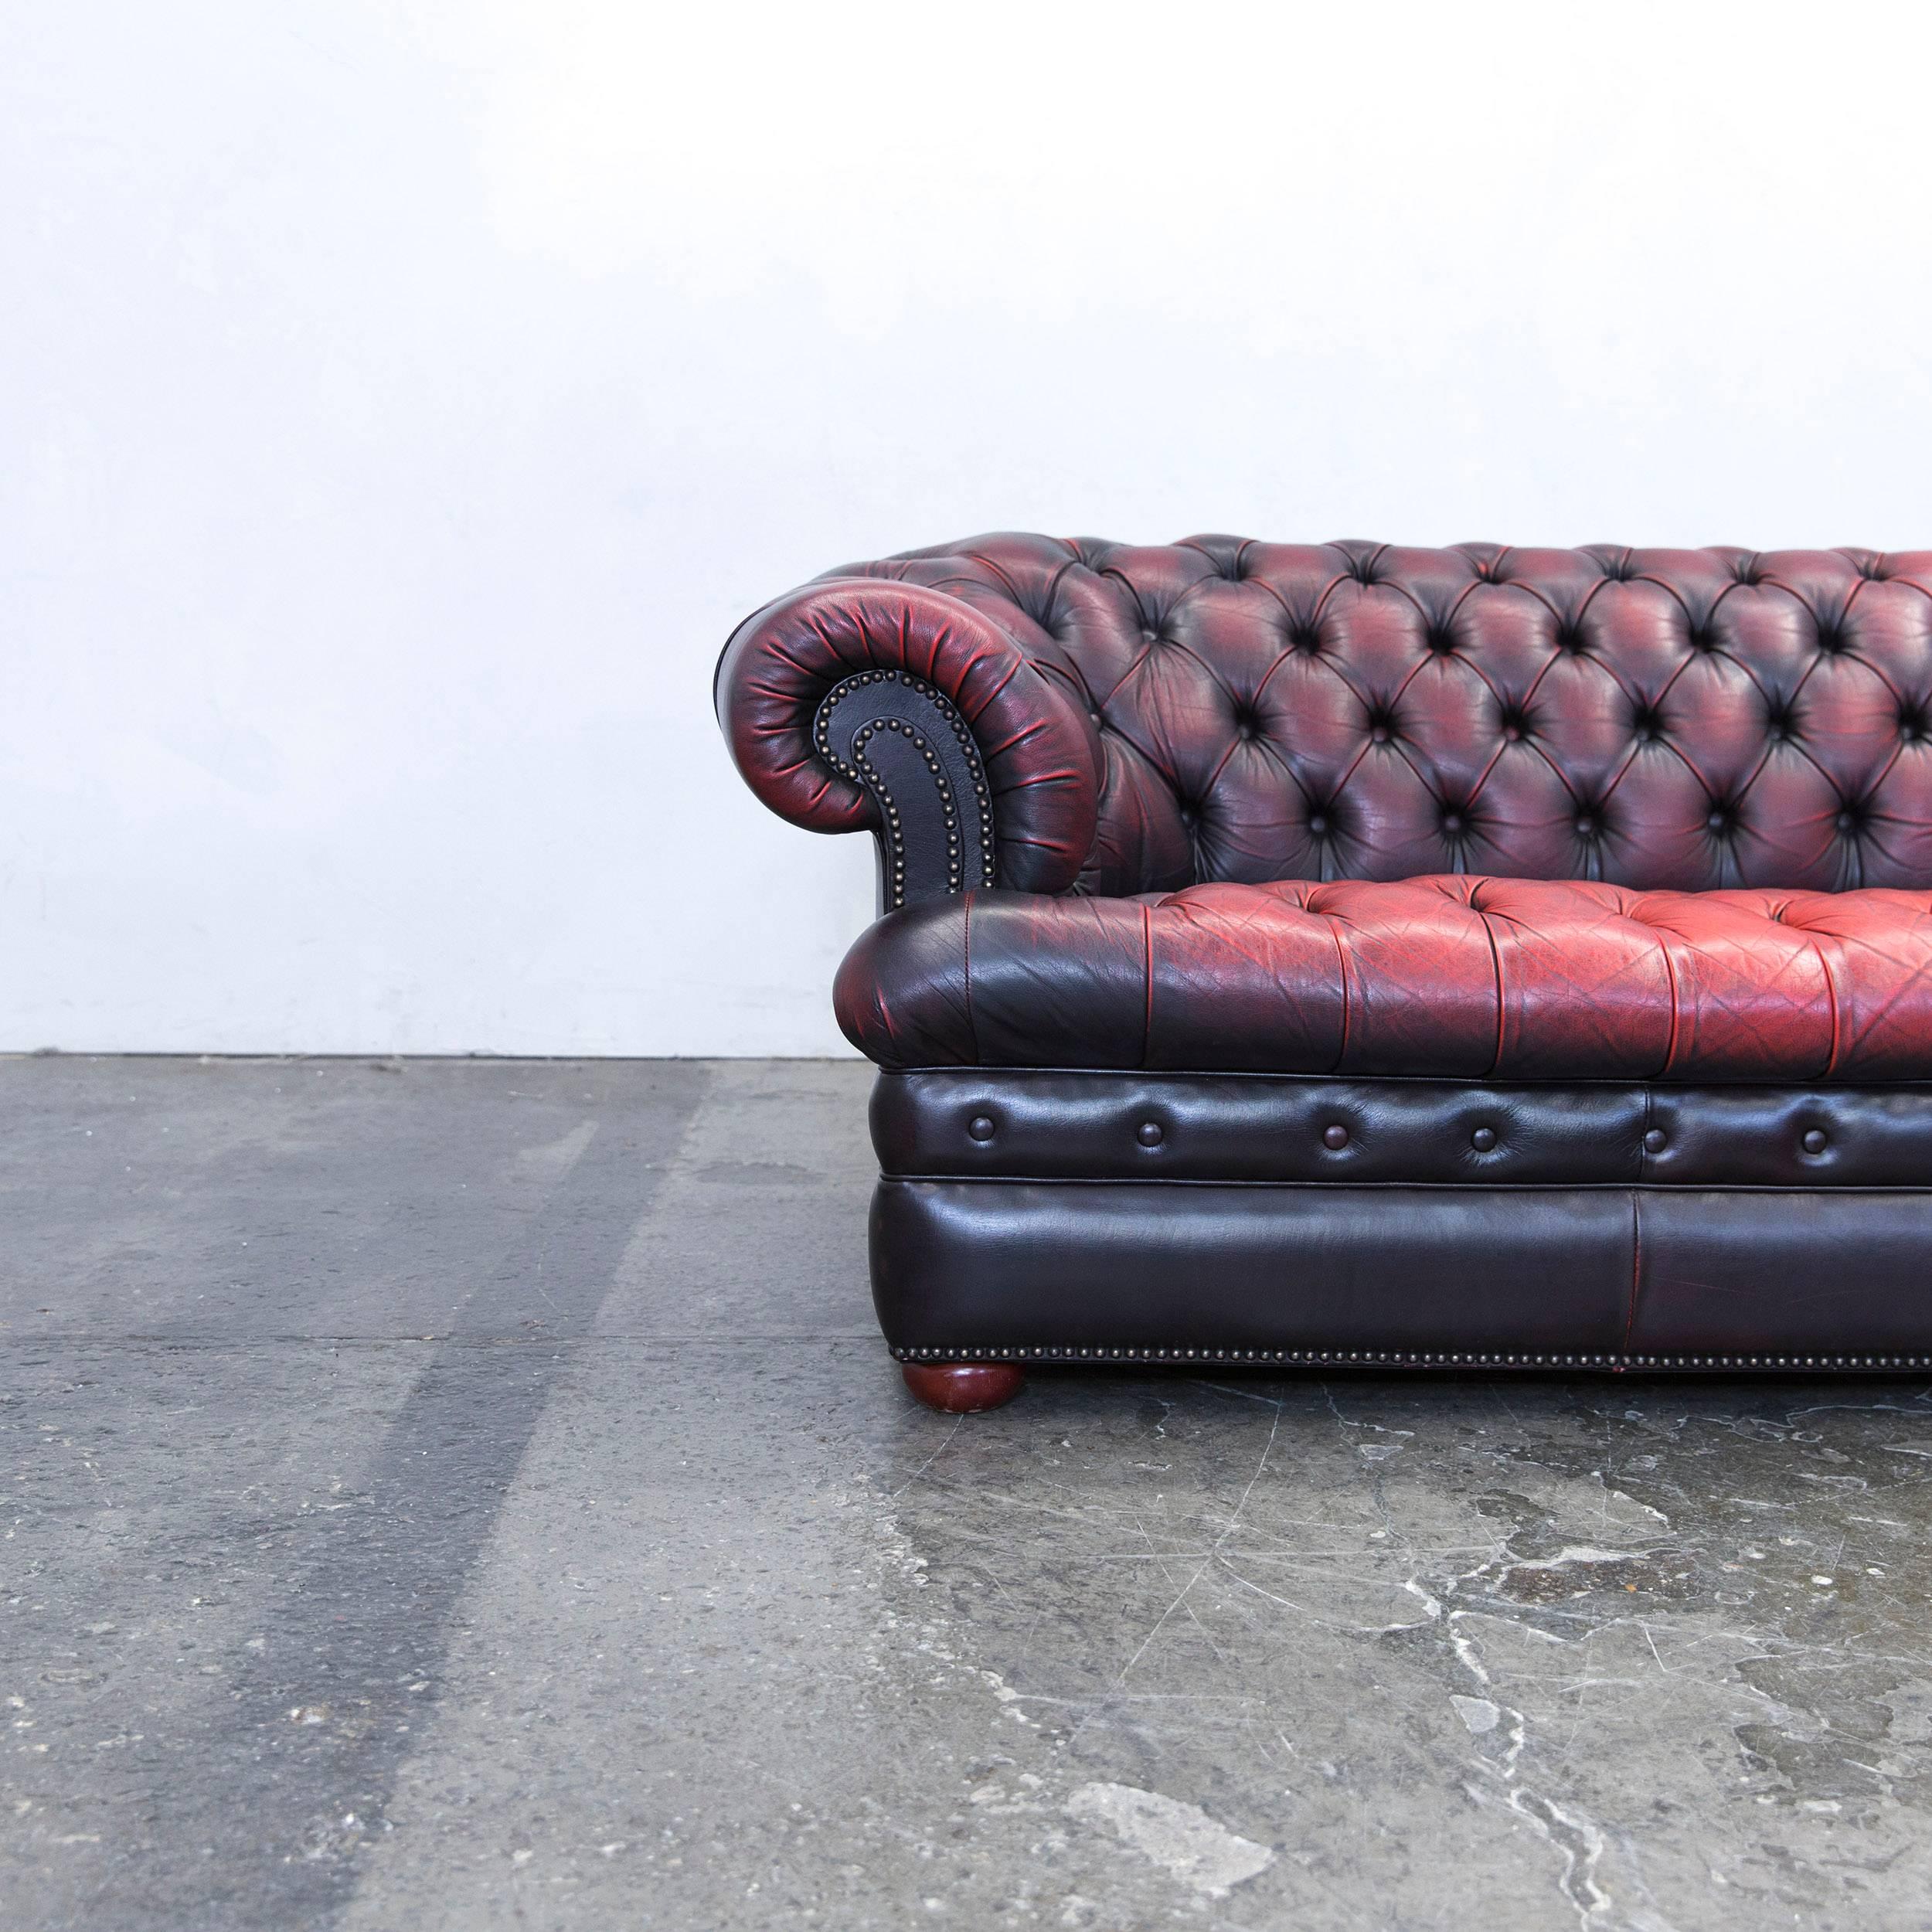 Red brown colored Chesterfield leather sofa in a vintage design, made for pure comfort and elegance.